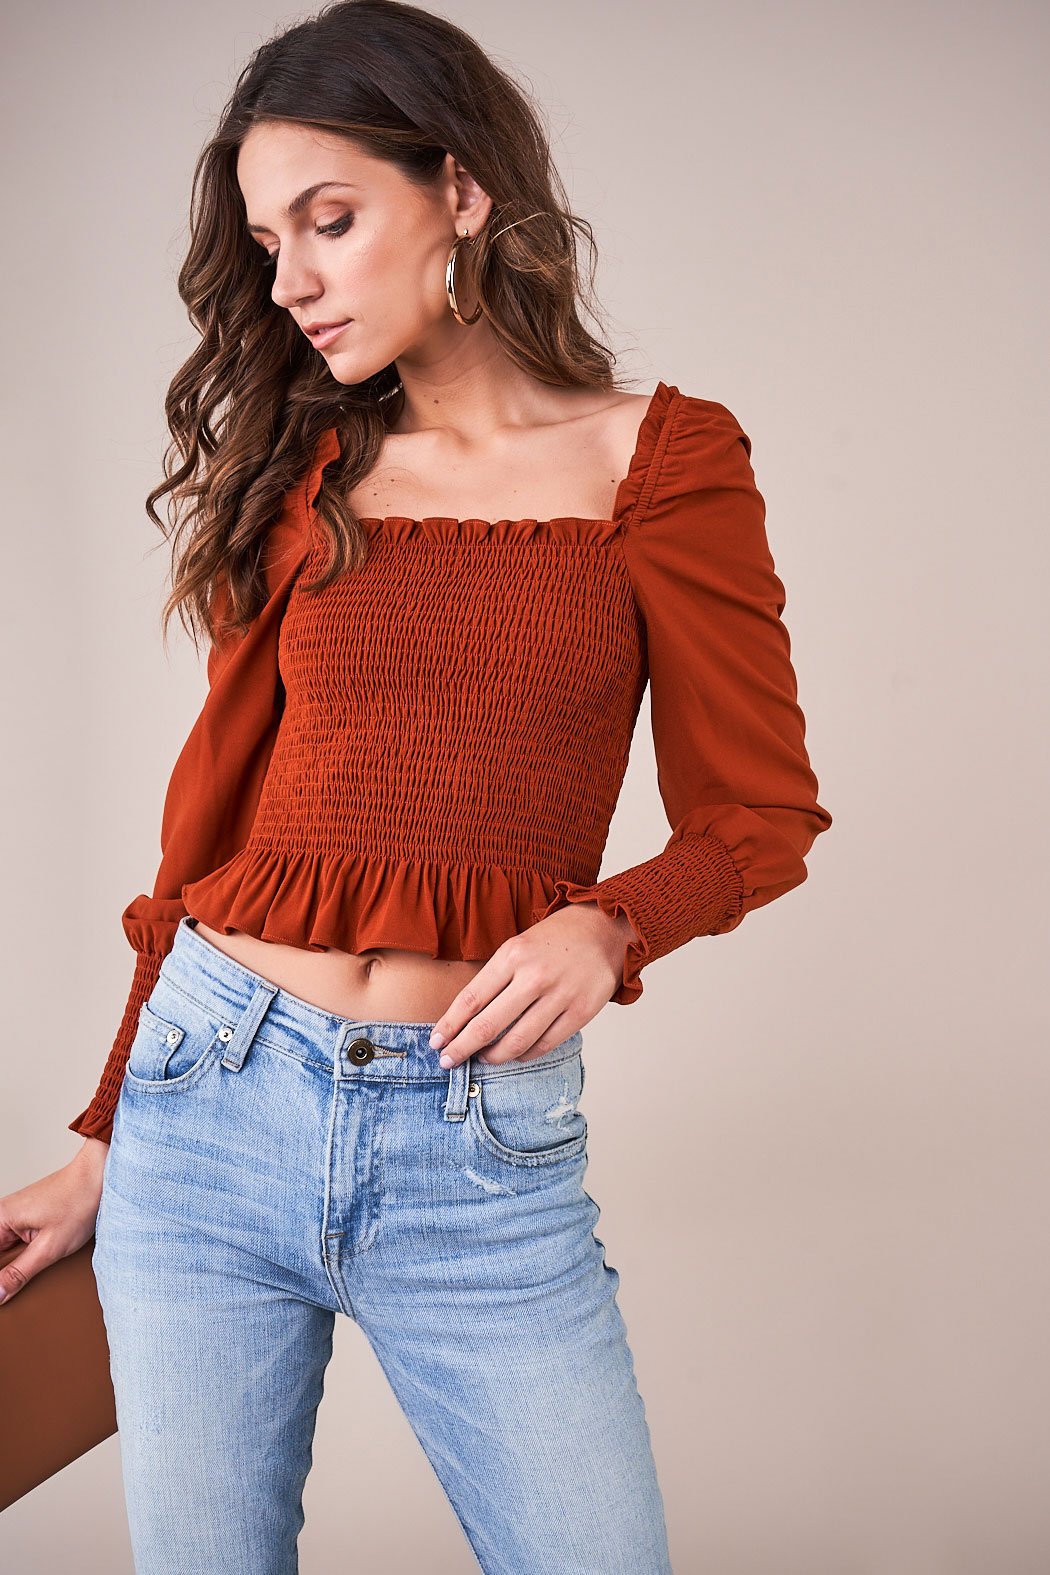 Muy Caliente Smocked Square Neck Top – Sugarlips